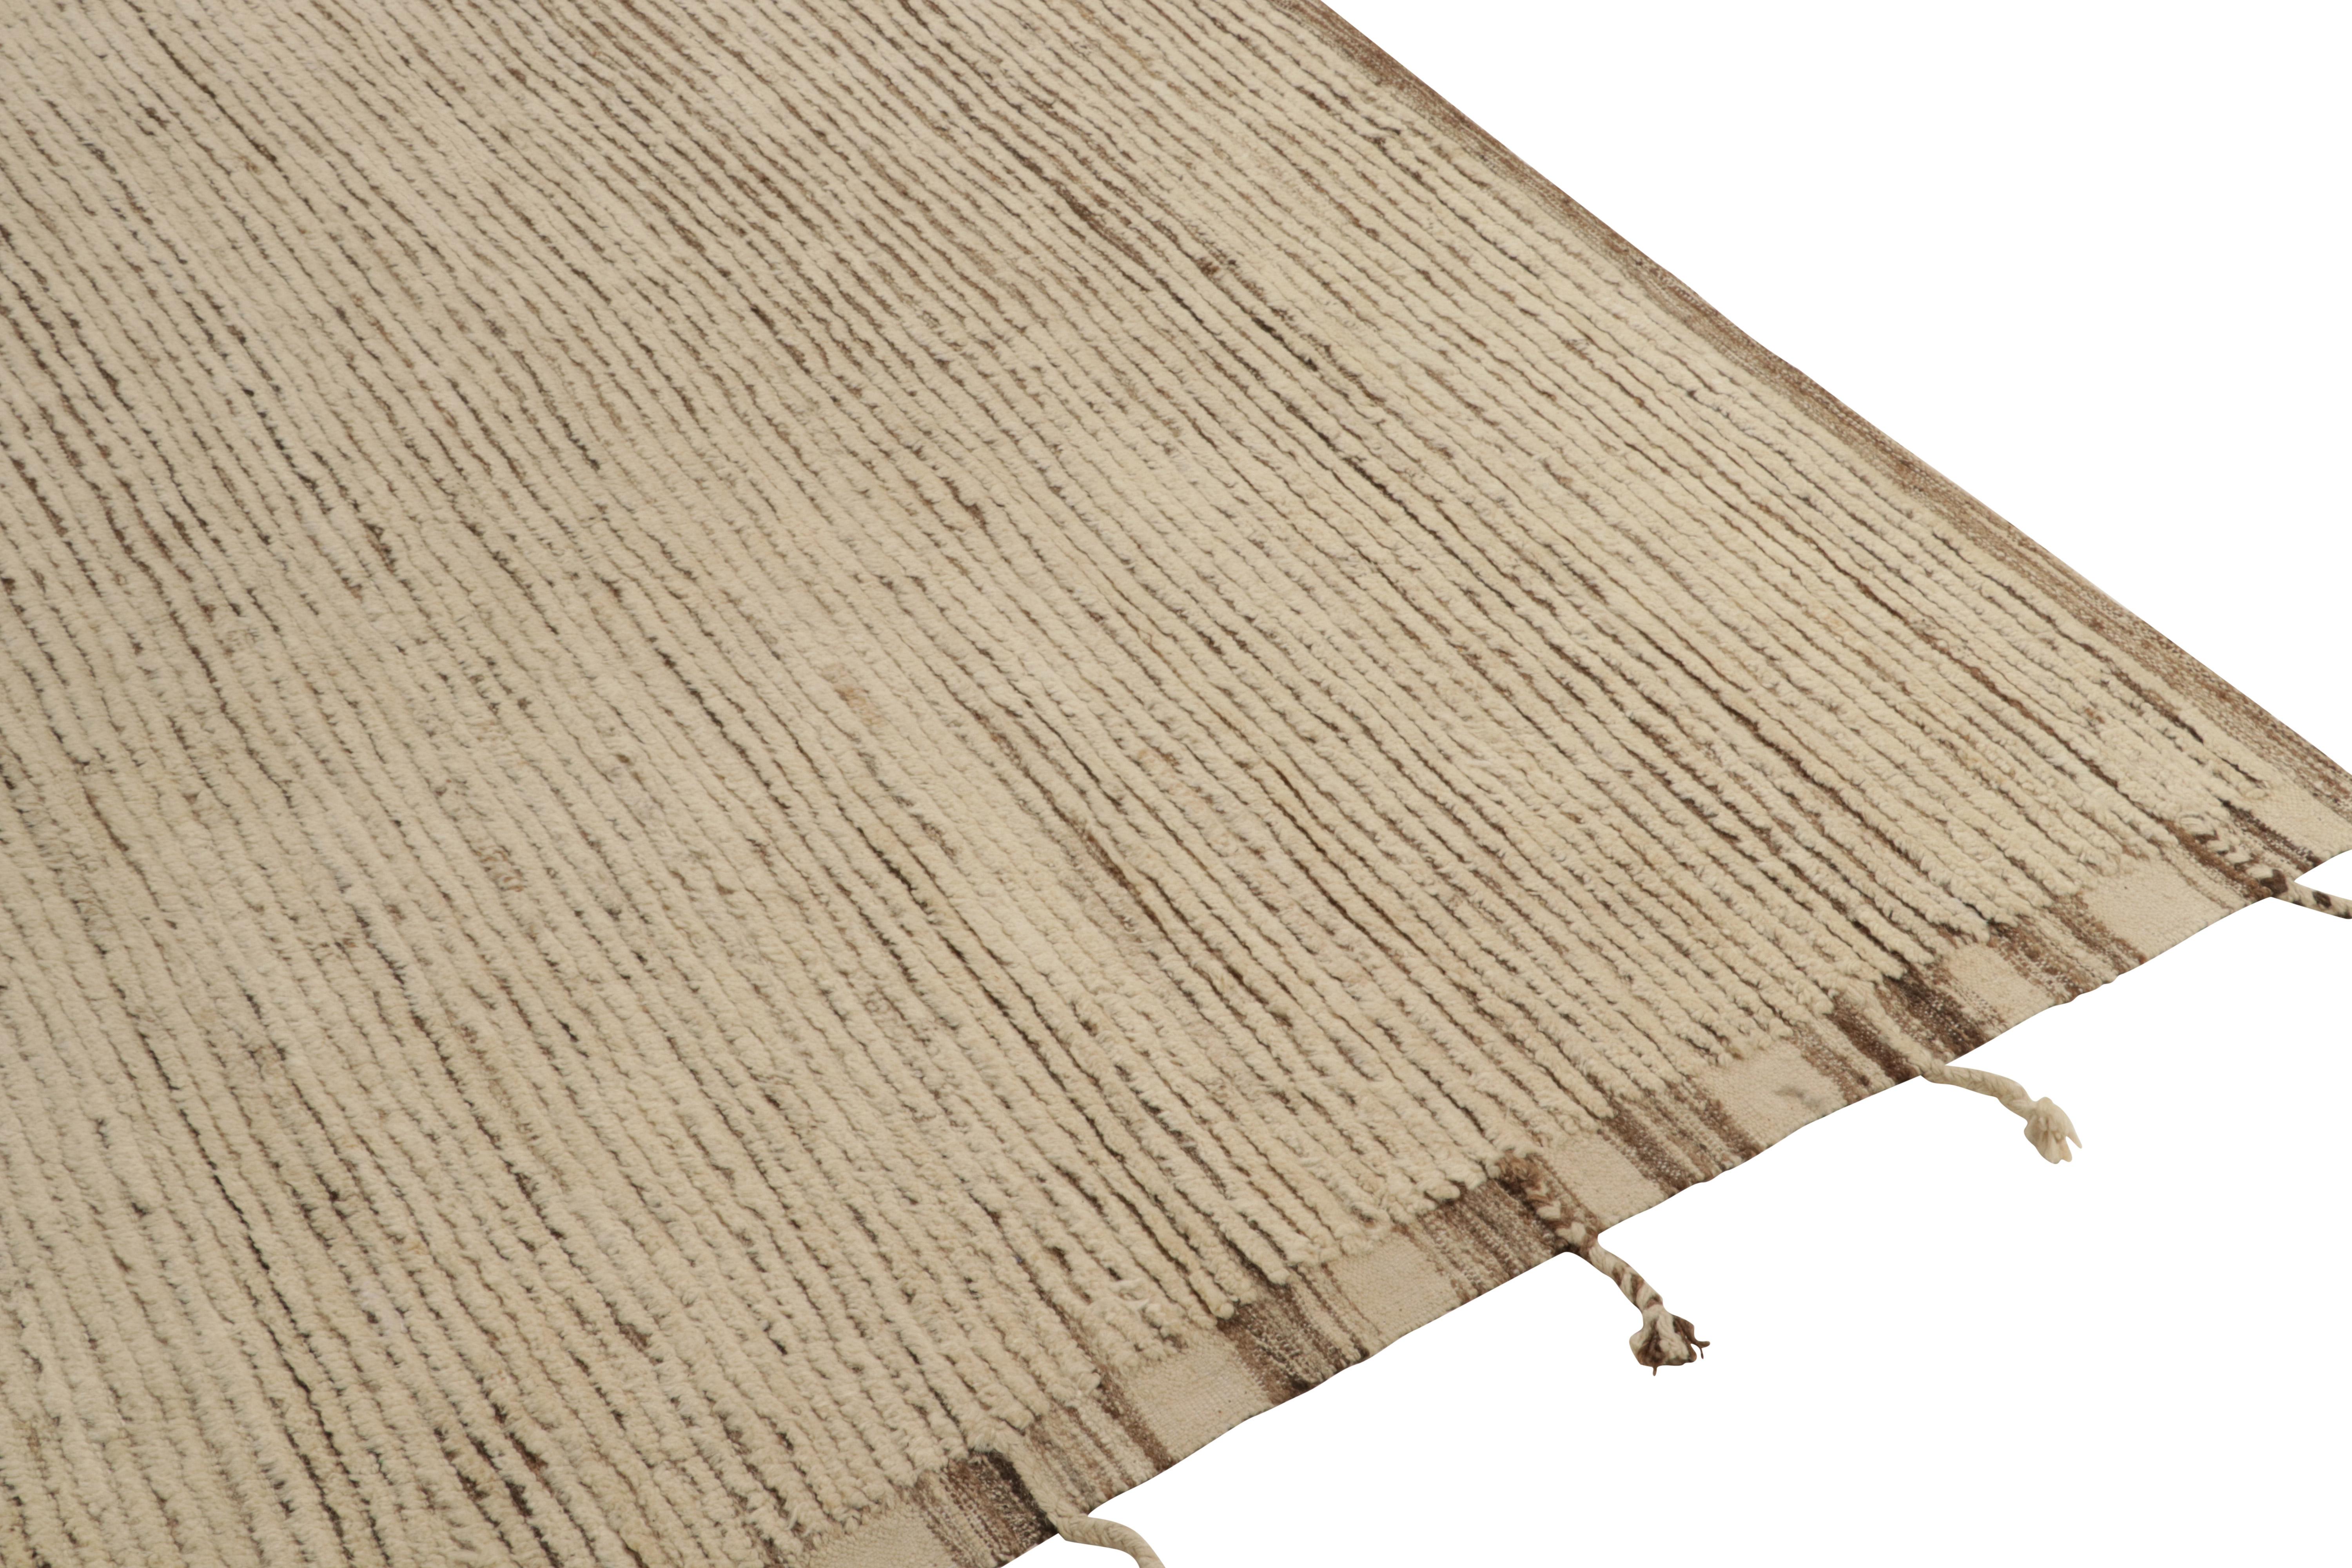 Hand-Knotted Rug & Kilim's Contemporary Moroccan style rug in Beige-Brown, Off-White Striae For Sale